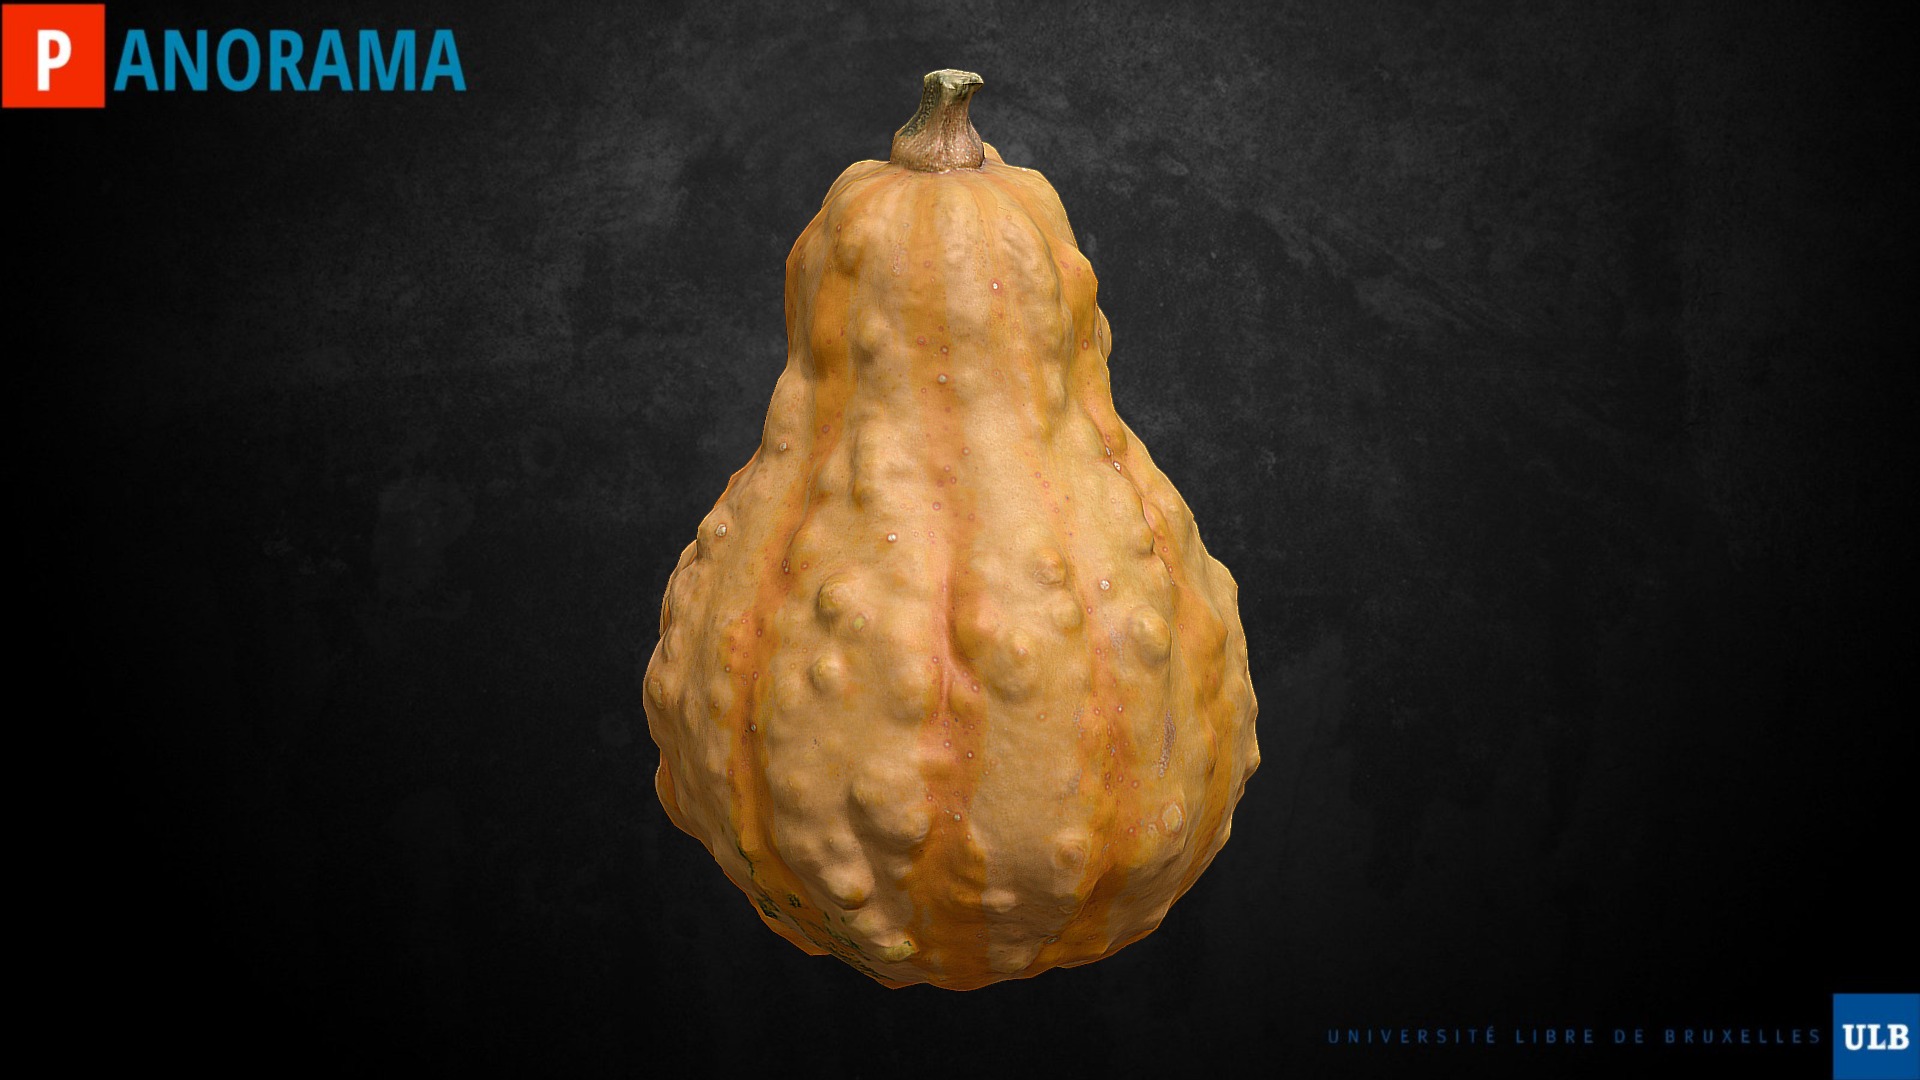 3D model Cucurbitacée #4 - This is a 3D model of the Cucurbitacée #4. The 3D model is about a yellow and brown vegetable.